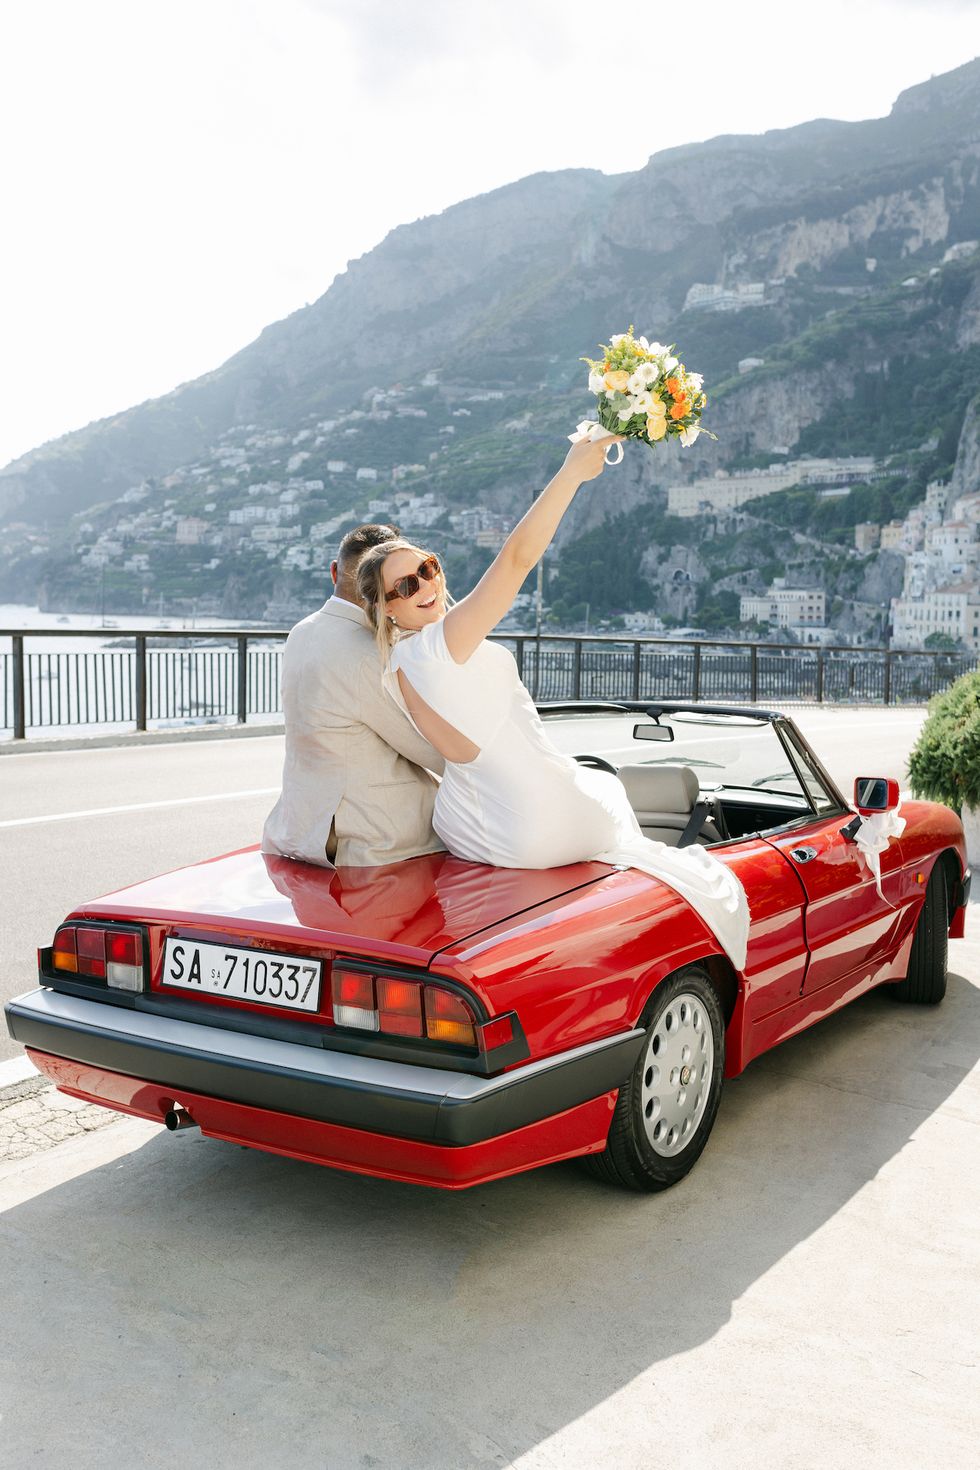 a man and woman in a convertible car with flowers on the hood